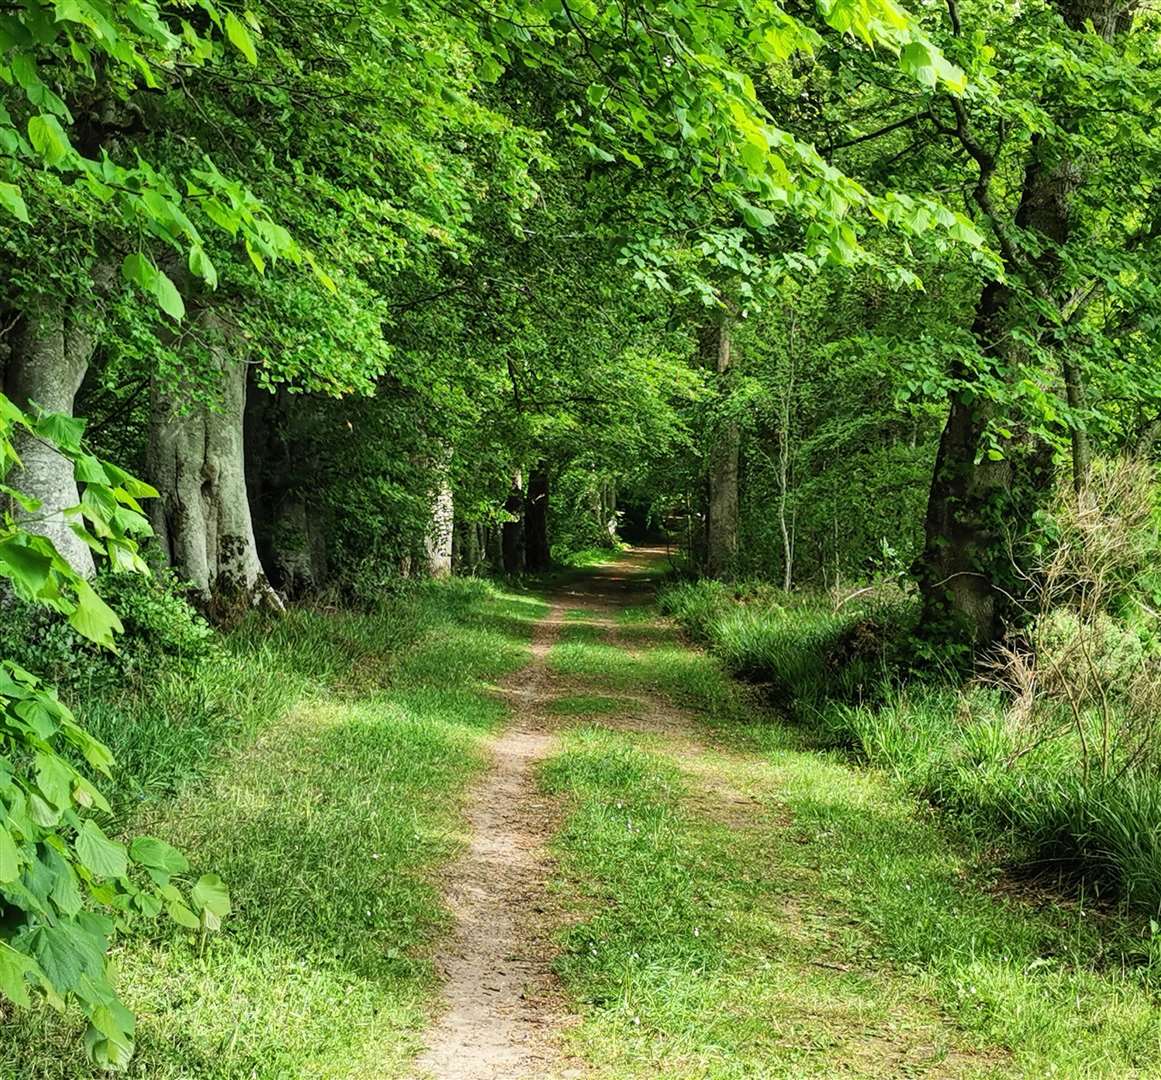 An inviting walk at Croy Woods. Picture: Moira MacKintosh